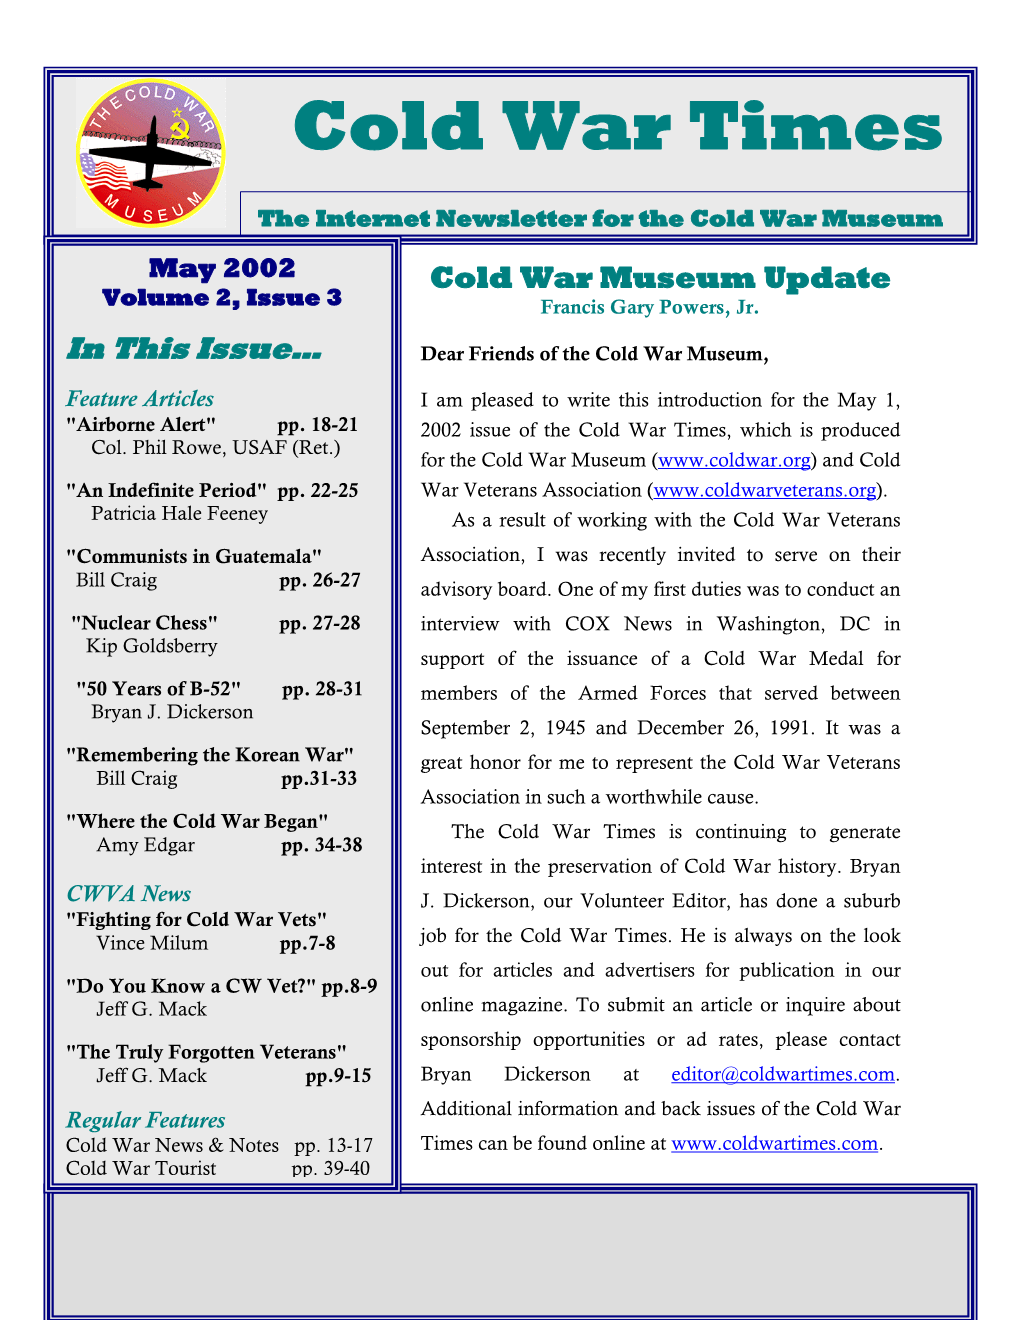 May 2002 Cold War Museum Update Volume 2, Issue 3 Francis Gary Powers, Jr